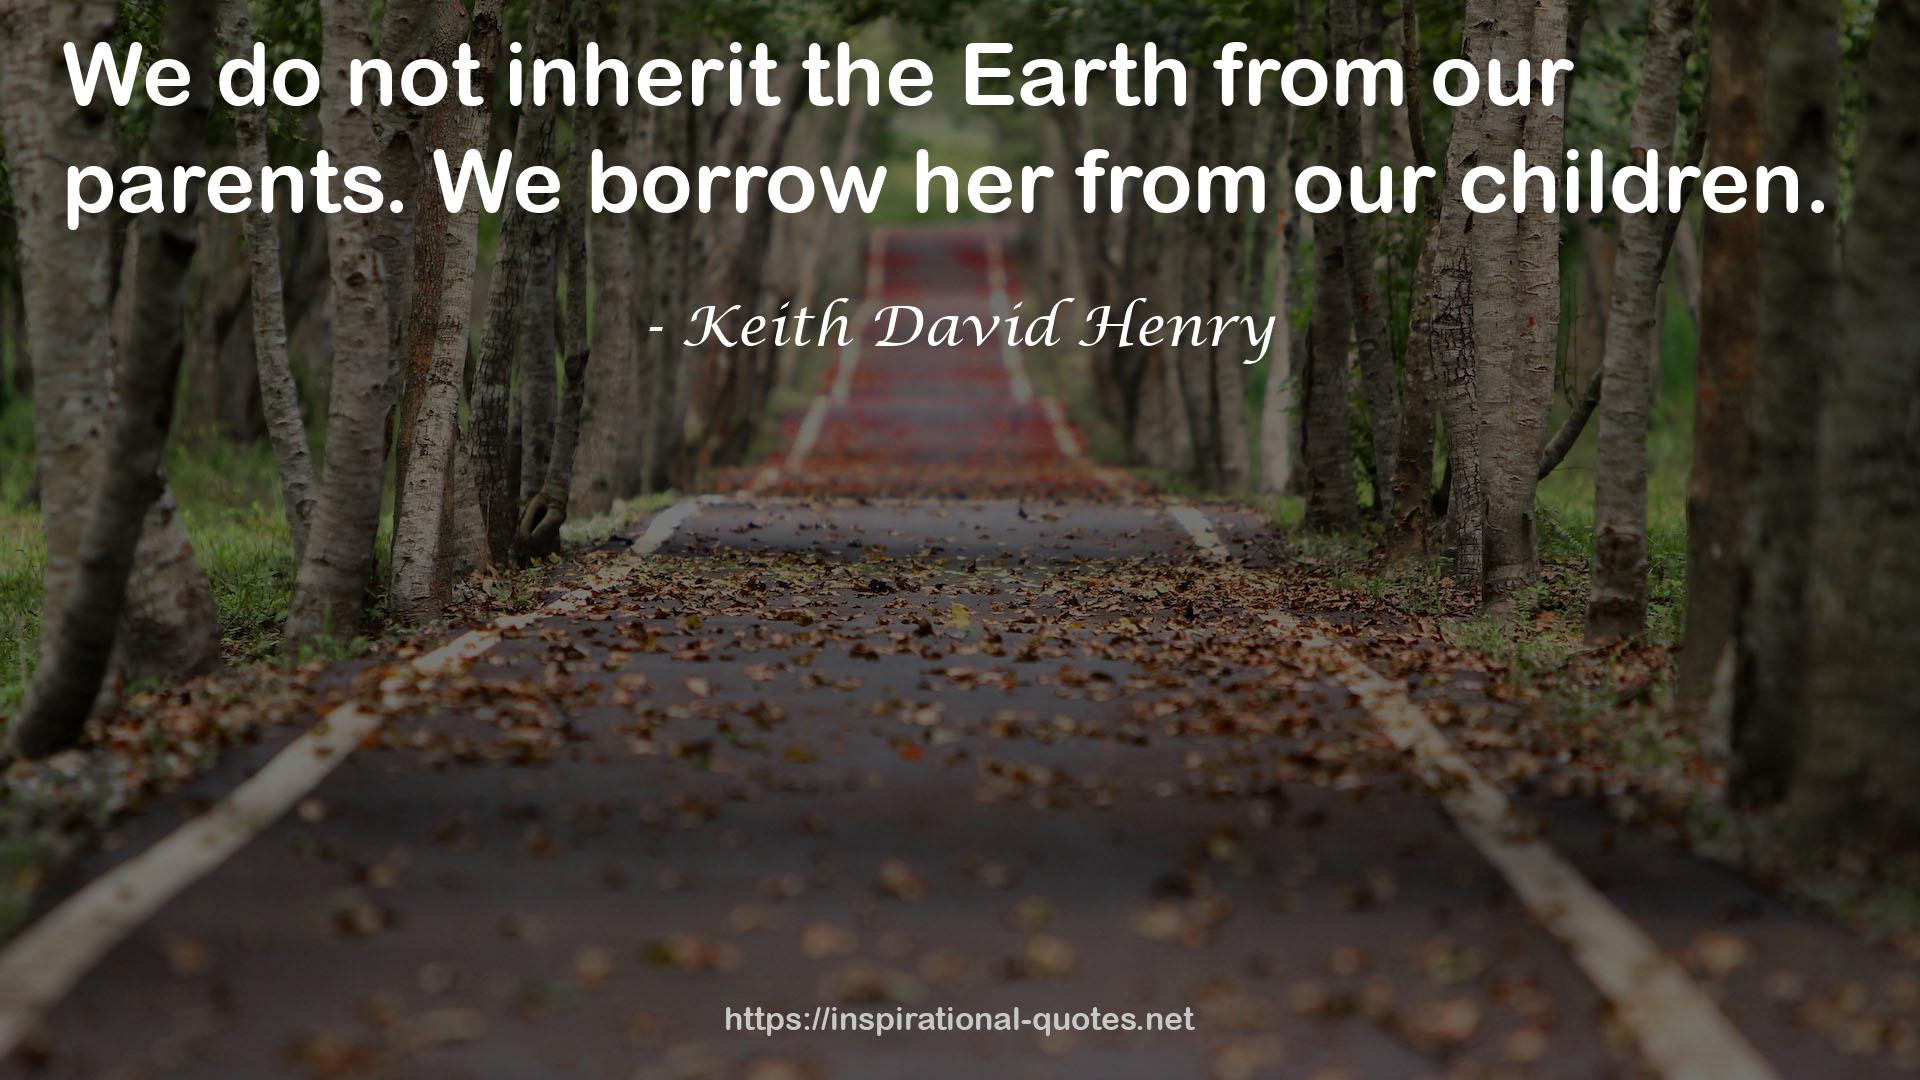 Keith David Henry QUOTES